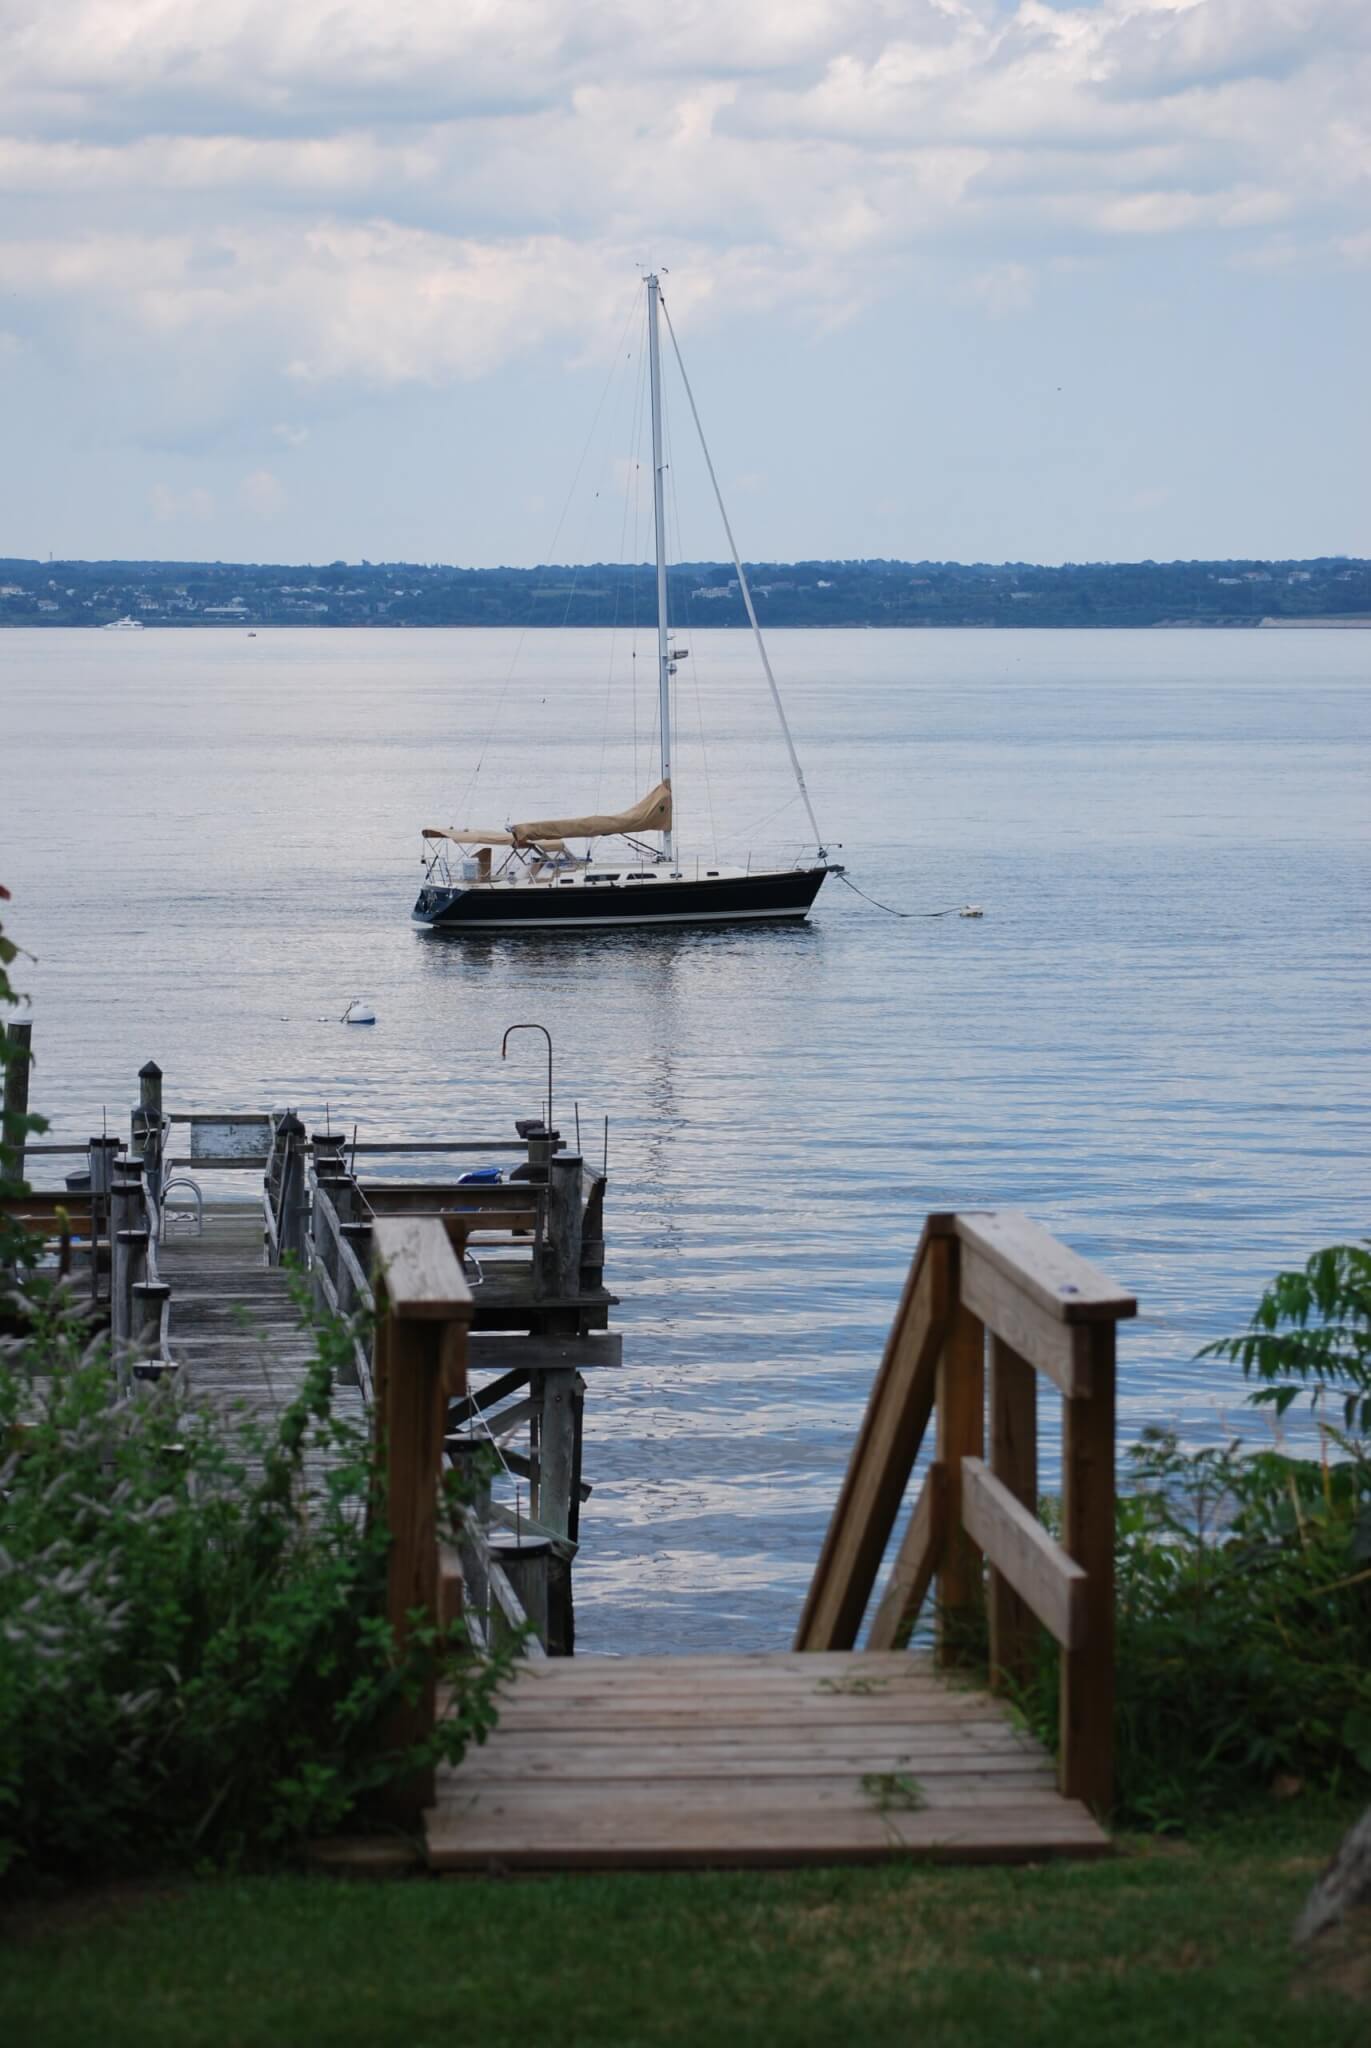 A sailboat and dock in Jamestown, RI